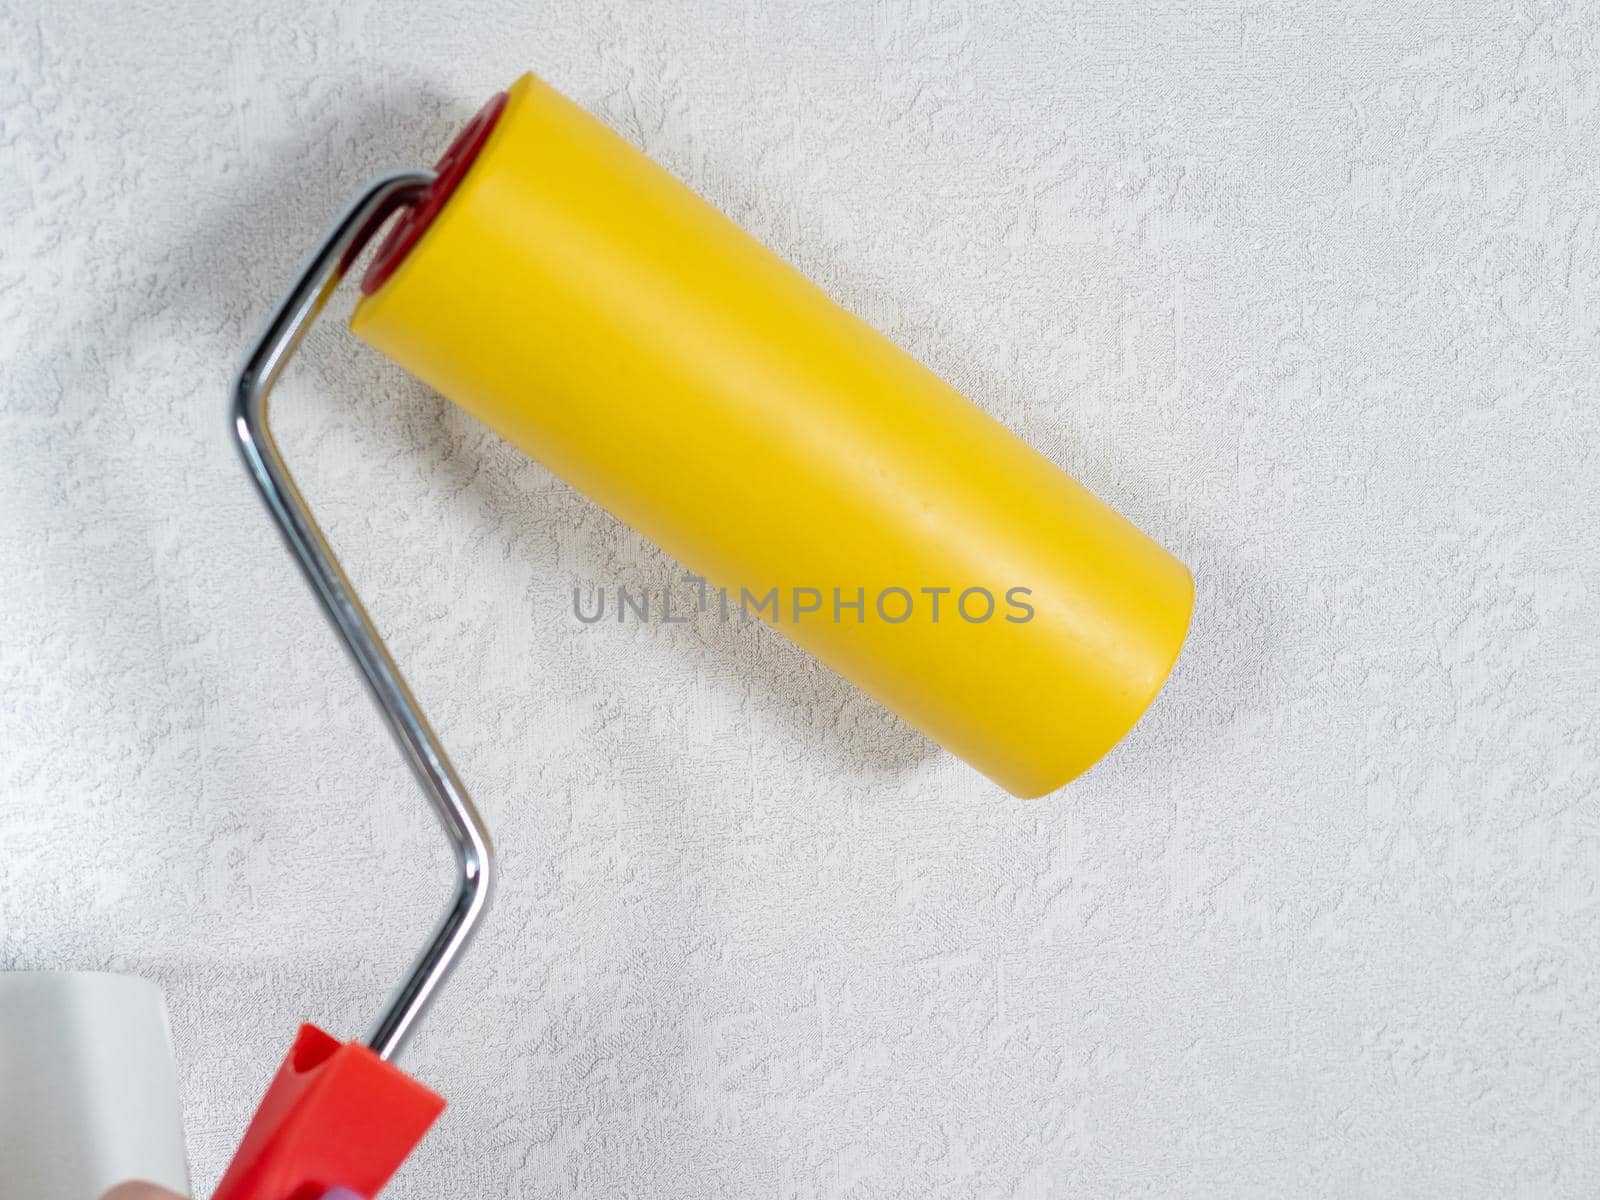 Roller for smoothing wallpaper yellow. Paint roller with a red handle and a yellow smooth nozzle on a light background. Wallpapering in the apartment.